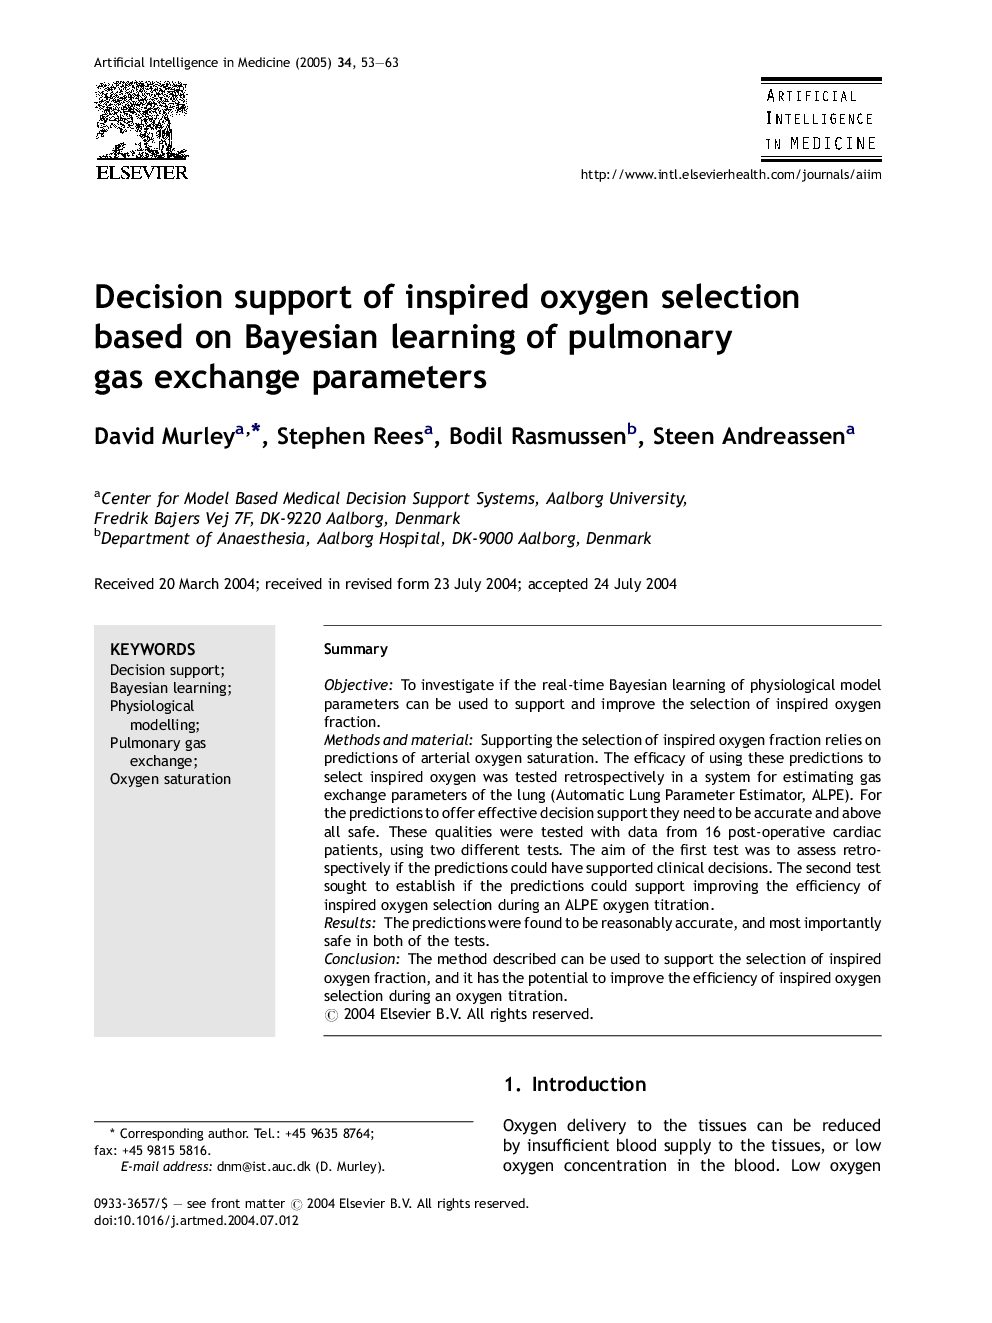 Decision support of inspired oxygen selection based on Bayesian learning of pulmonary gas exchange parameters